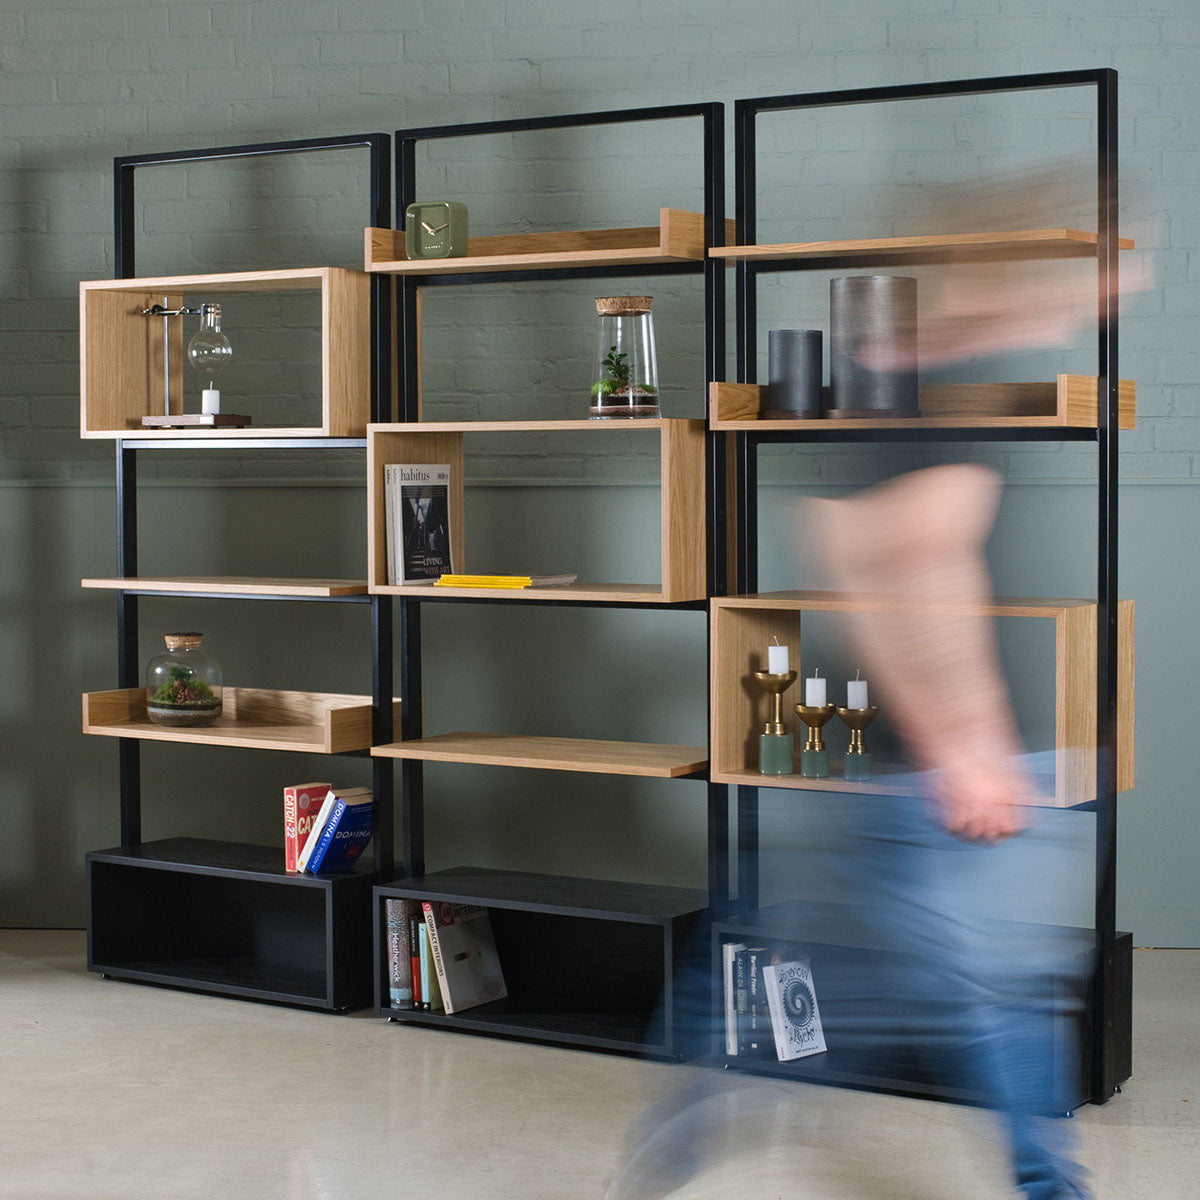 An image of the Oak Shelving Units, Iva product available from Koda Studios